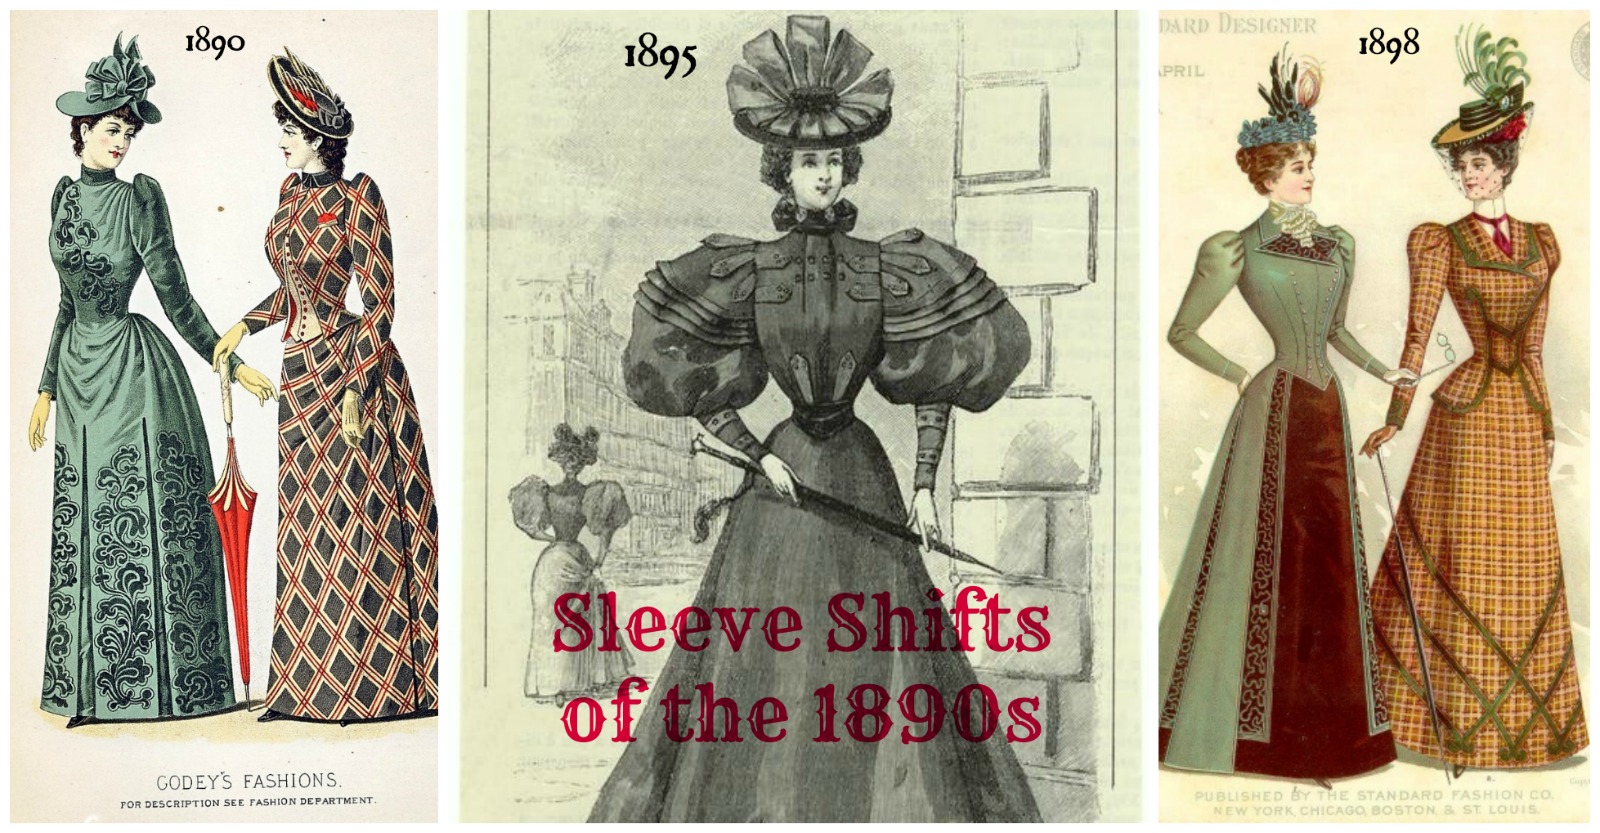 Sleeve Shifts of the 1890s